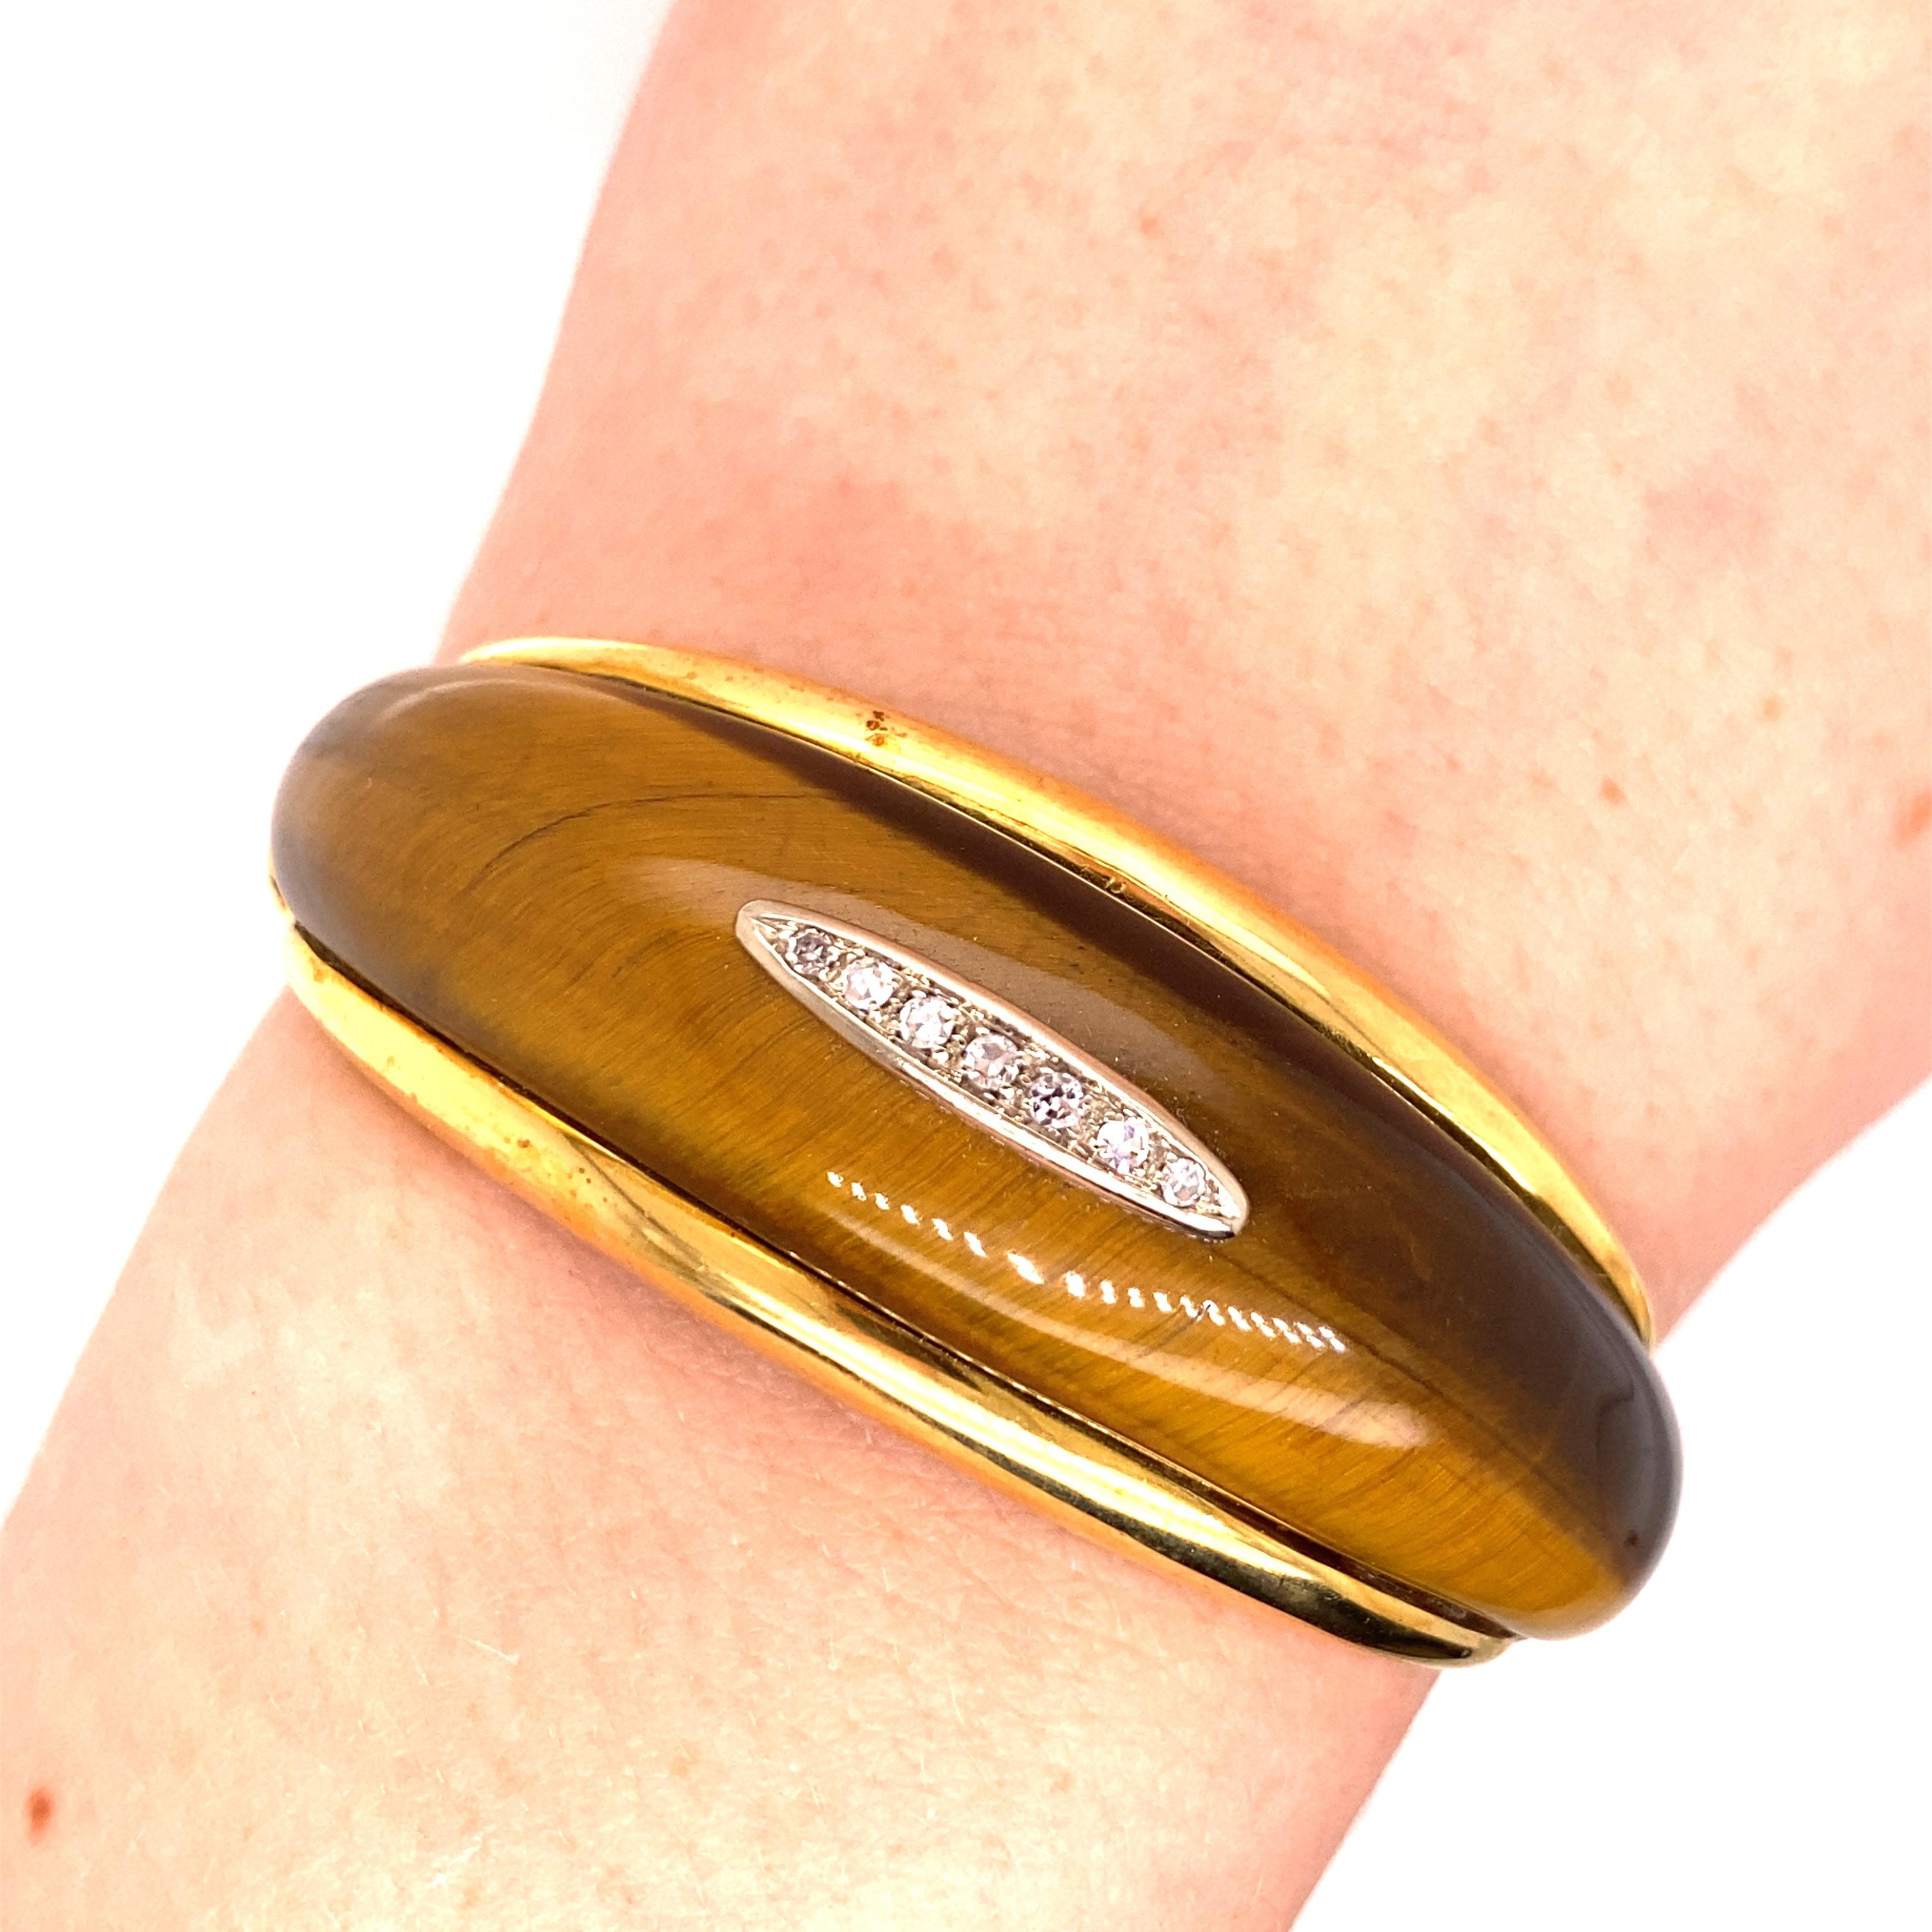 Vintage 1960's 18K Yellow Gold Tiger's Eye Bangle - The Tiger's Eye measures 2.25 inches long and .6 inches wide. There are 7 single cut diamonds set in white gold in the center of the Tiger's Eye. They weigh approximately .18ct with H-I color and